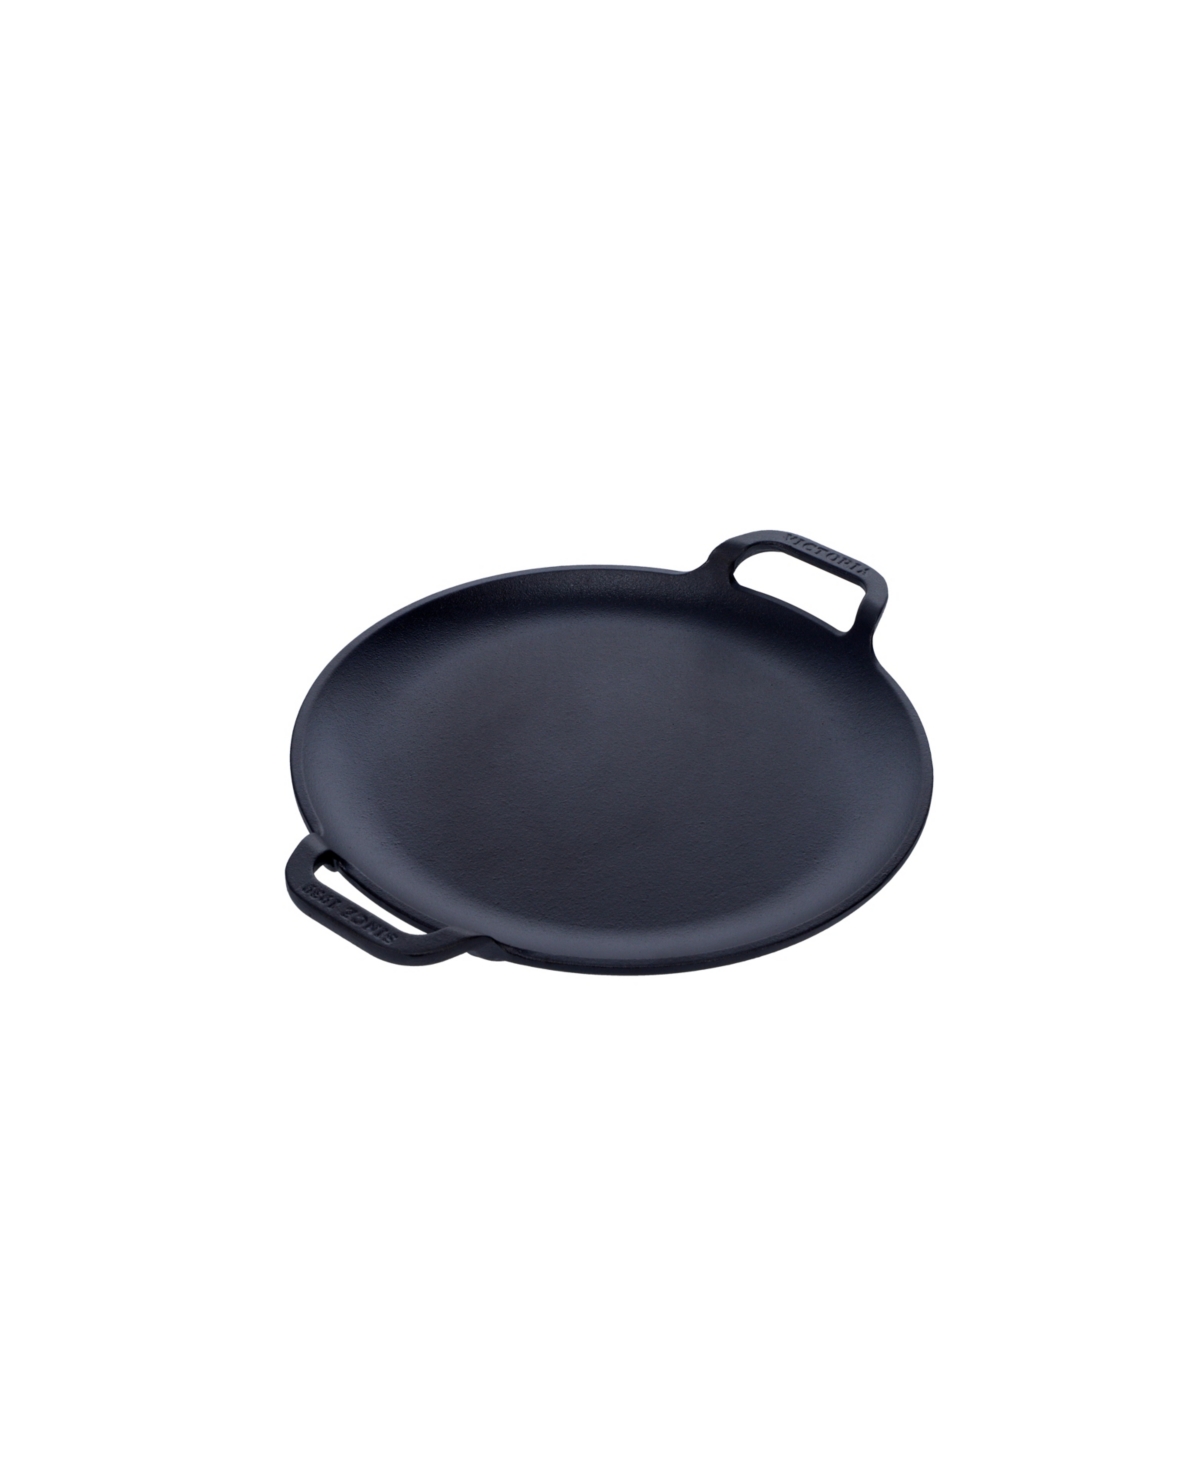 Victoria 10" Comal With 2 Side Handles, Seasoned In Black